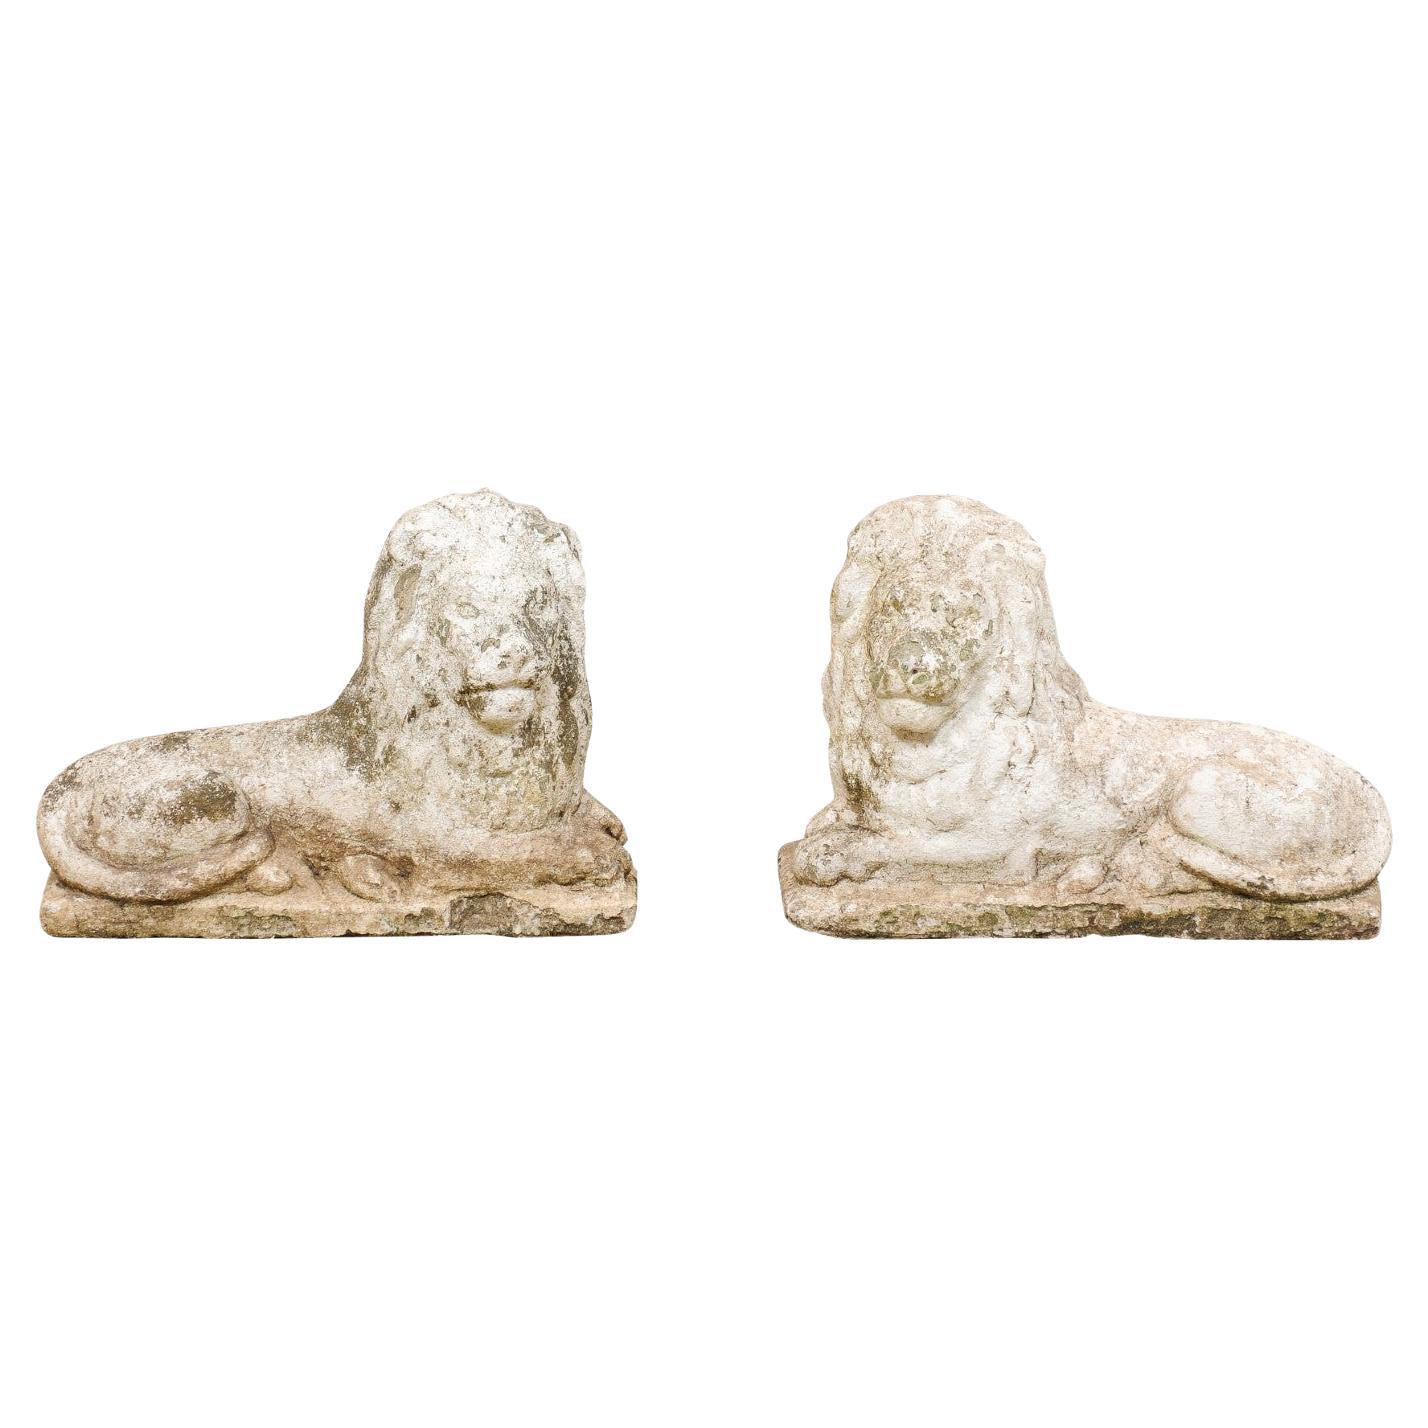 French Pair of Early 20th C. Cast-Stone Lion Statues For Sale